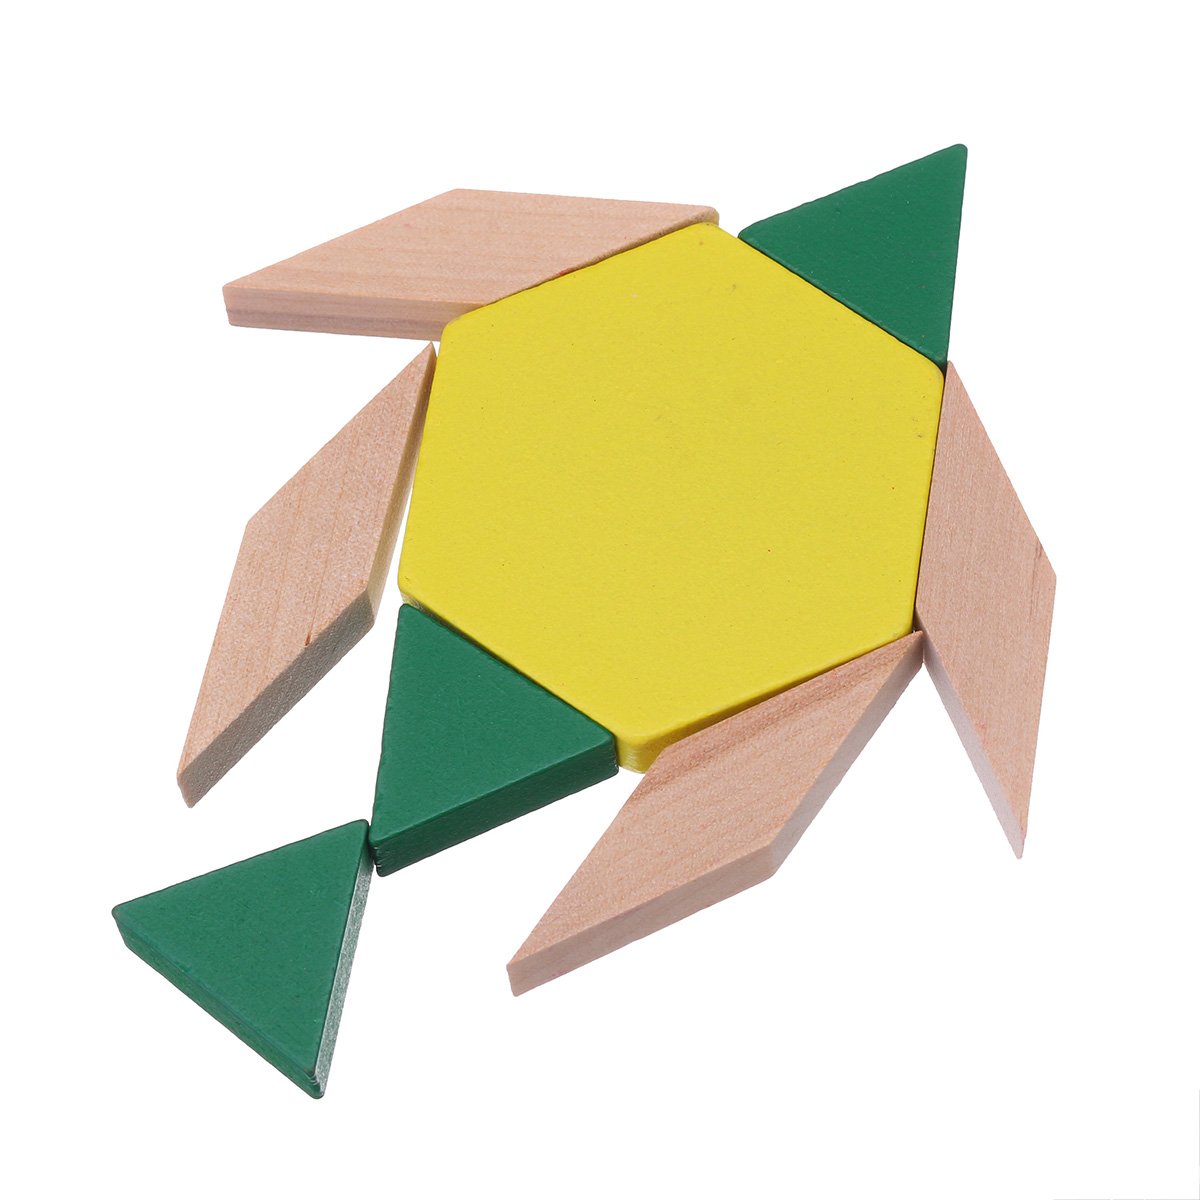 125-Pieces-Wooden-Childrens-Intellectual-Geometric-Shapes-Building-Blocks-Jigsaw-Puzzles-Early-Educa-1701898-4